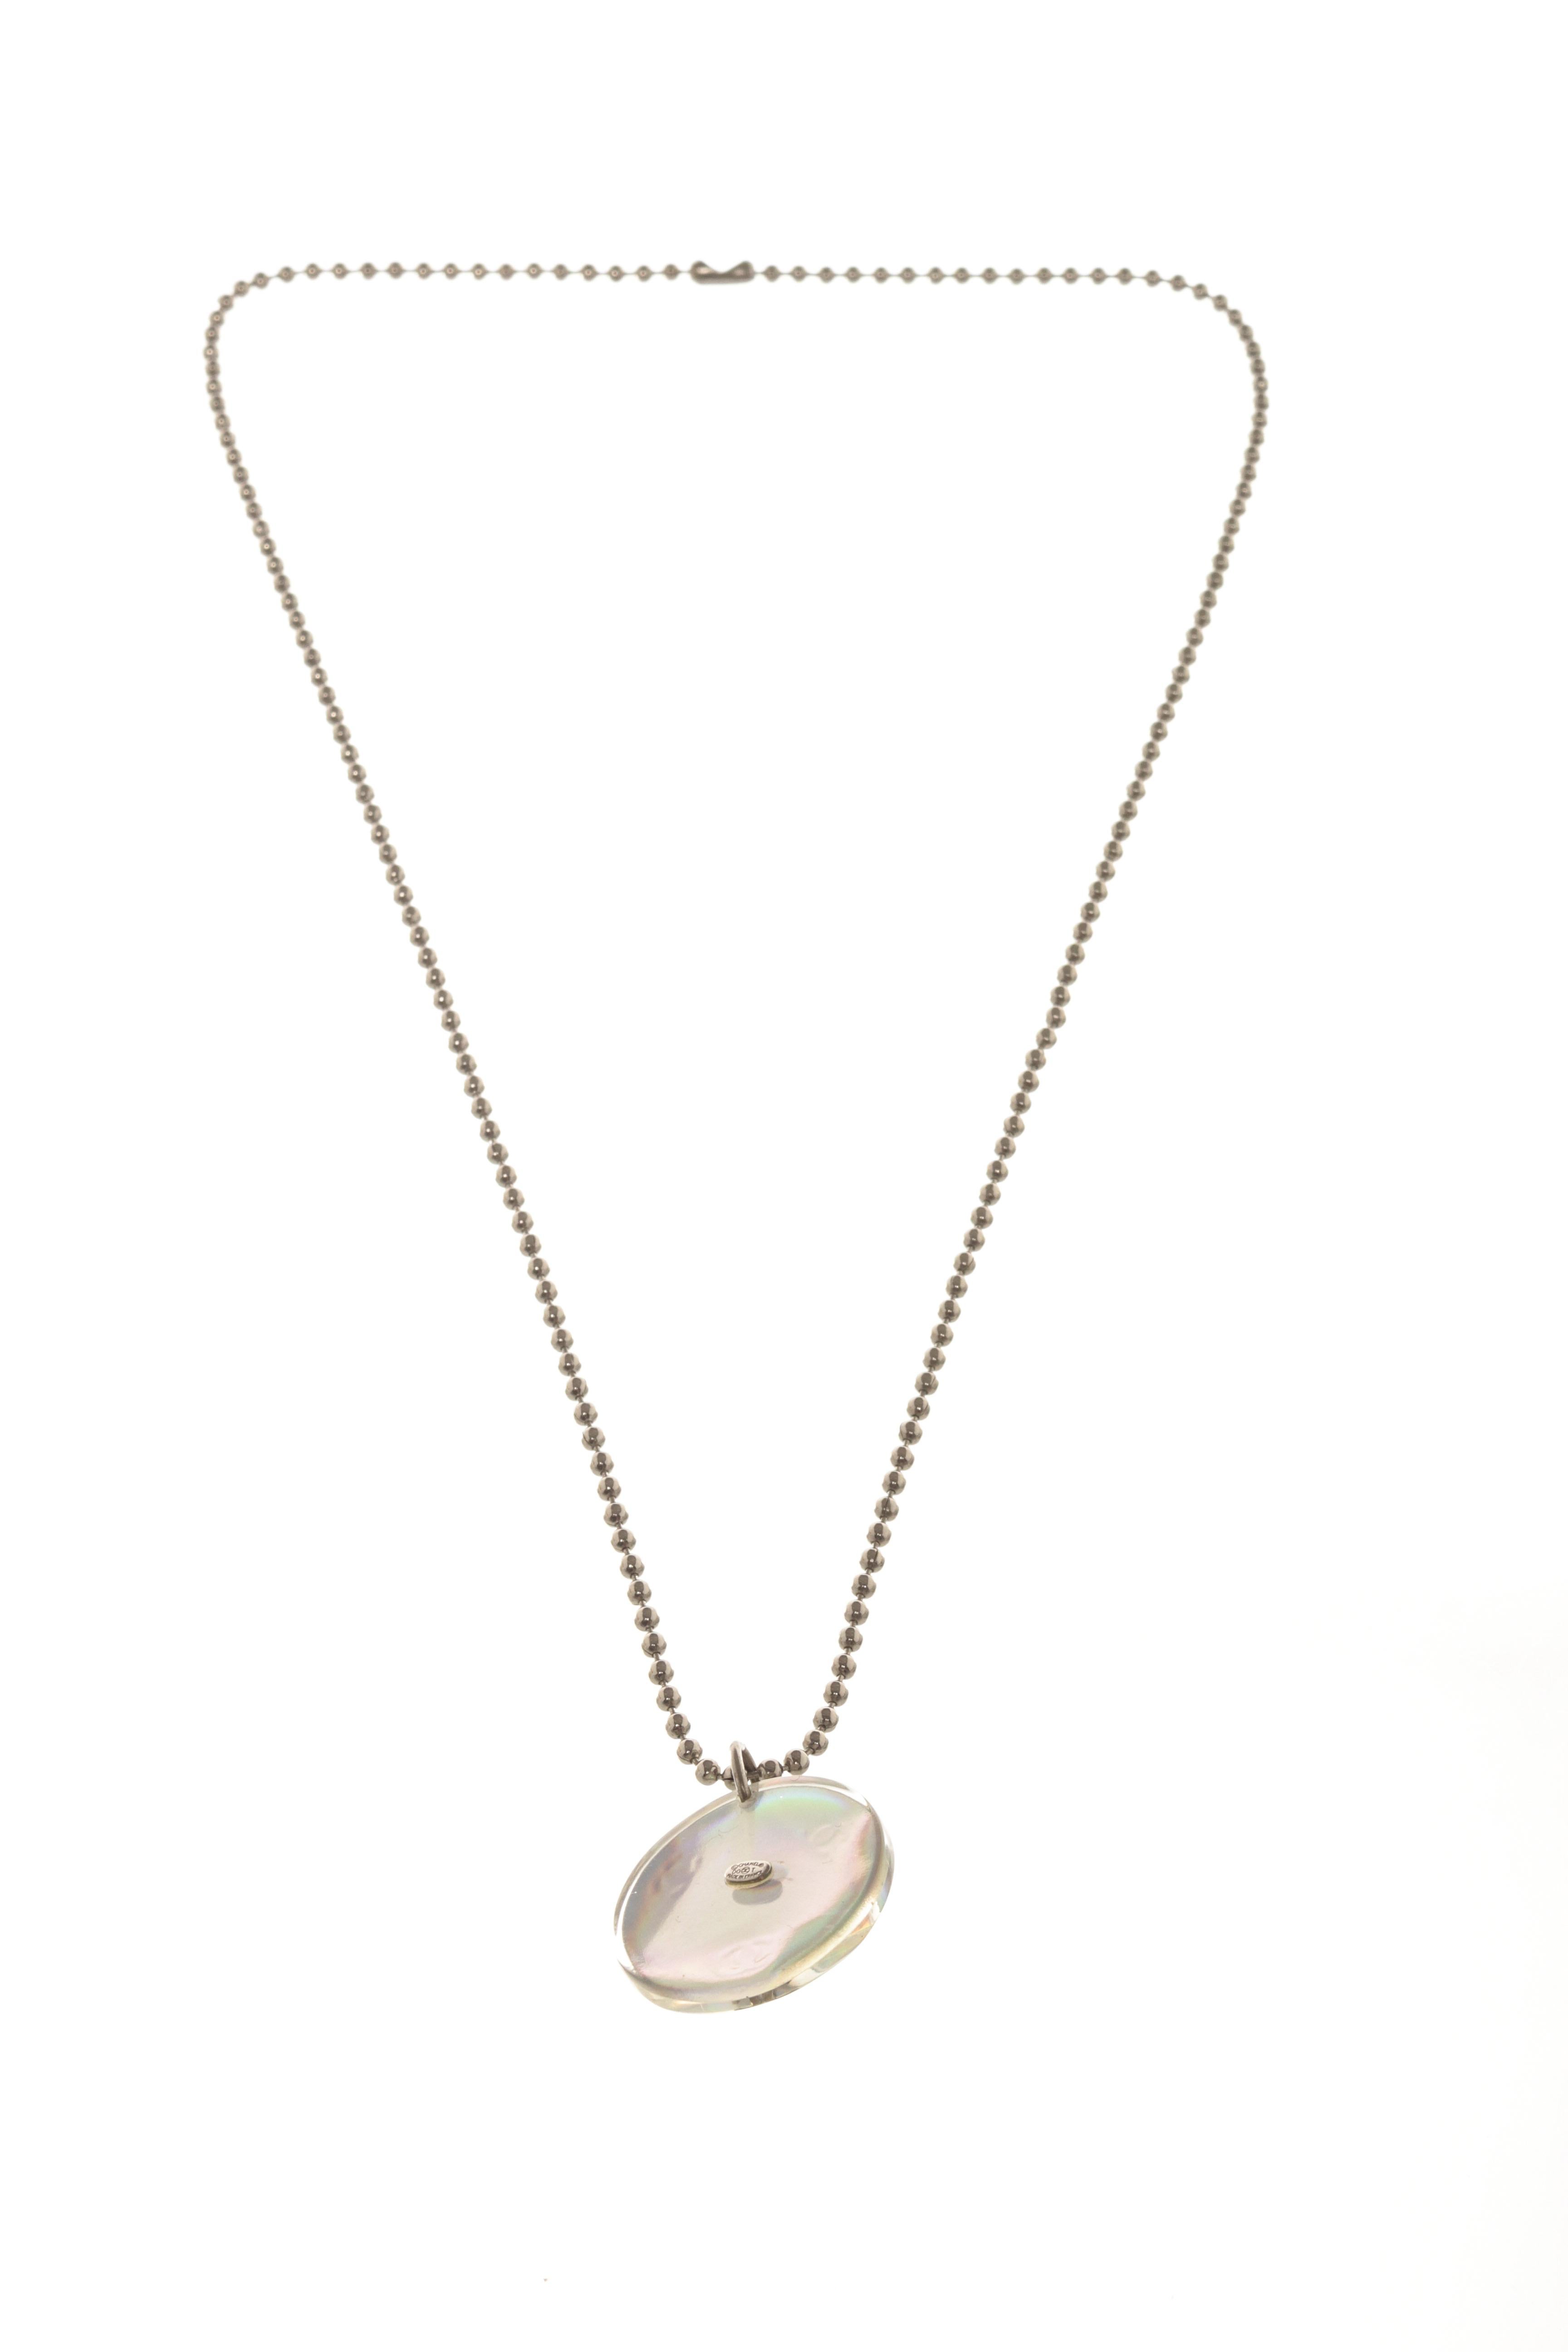 Chanel Iridescent CC Gem Necklace with metal hardware, logo engraving, and made in France

770181MSC